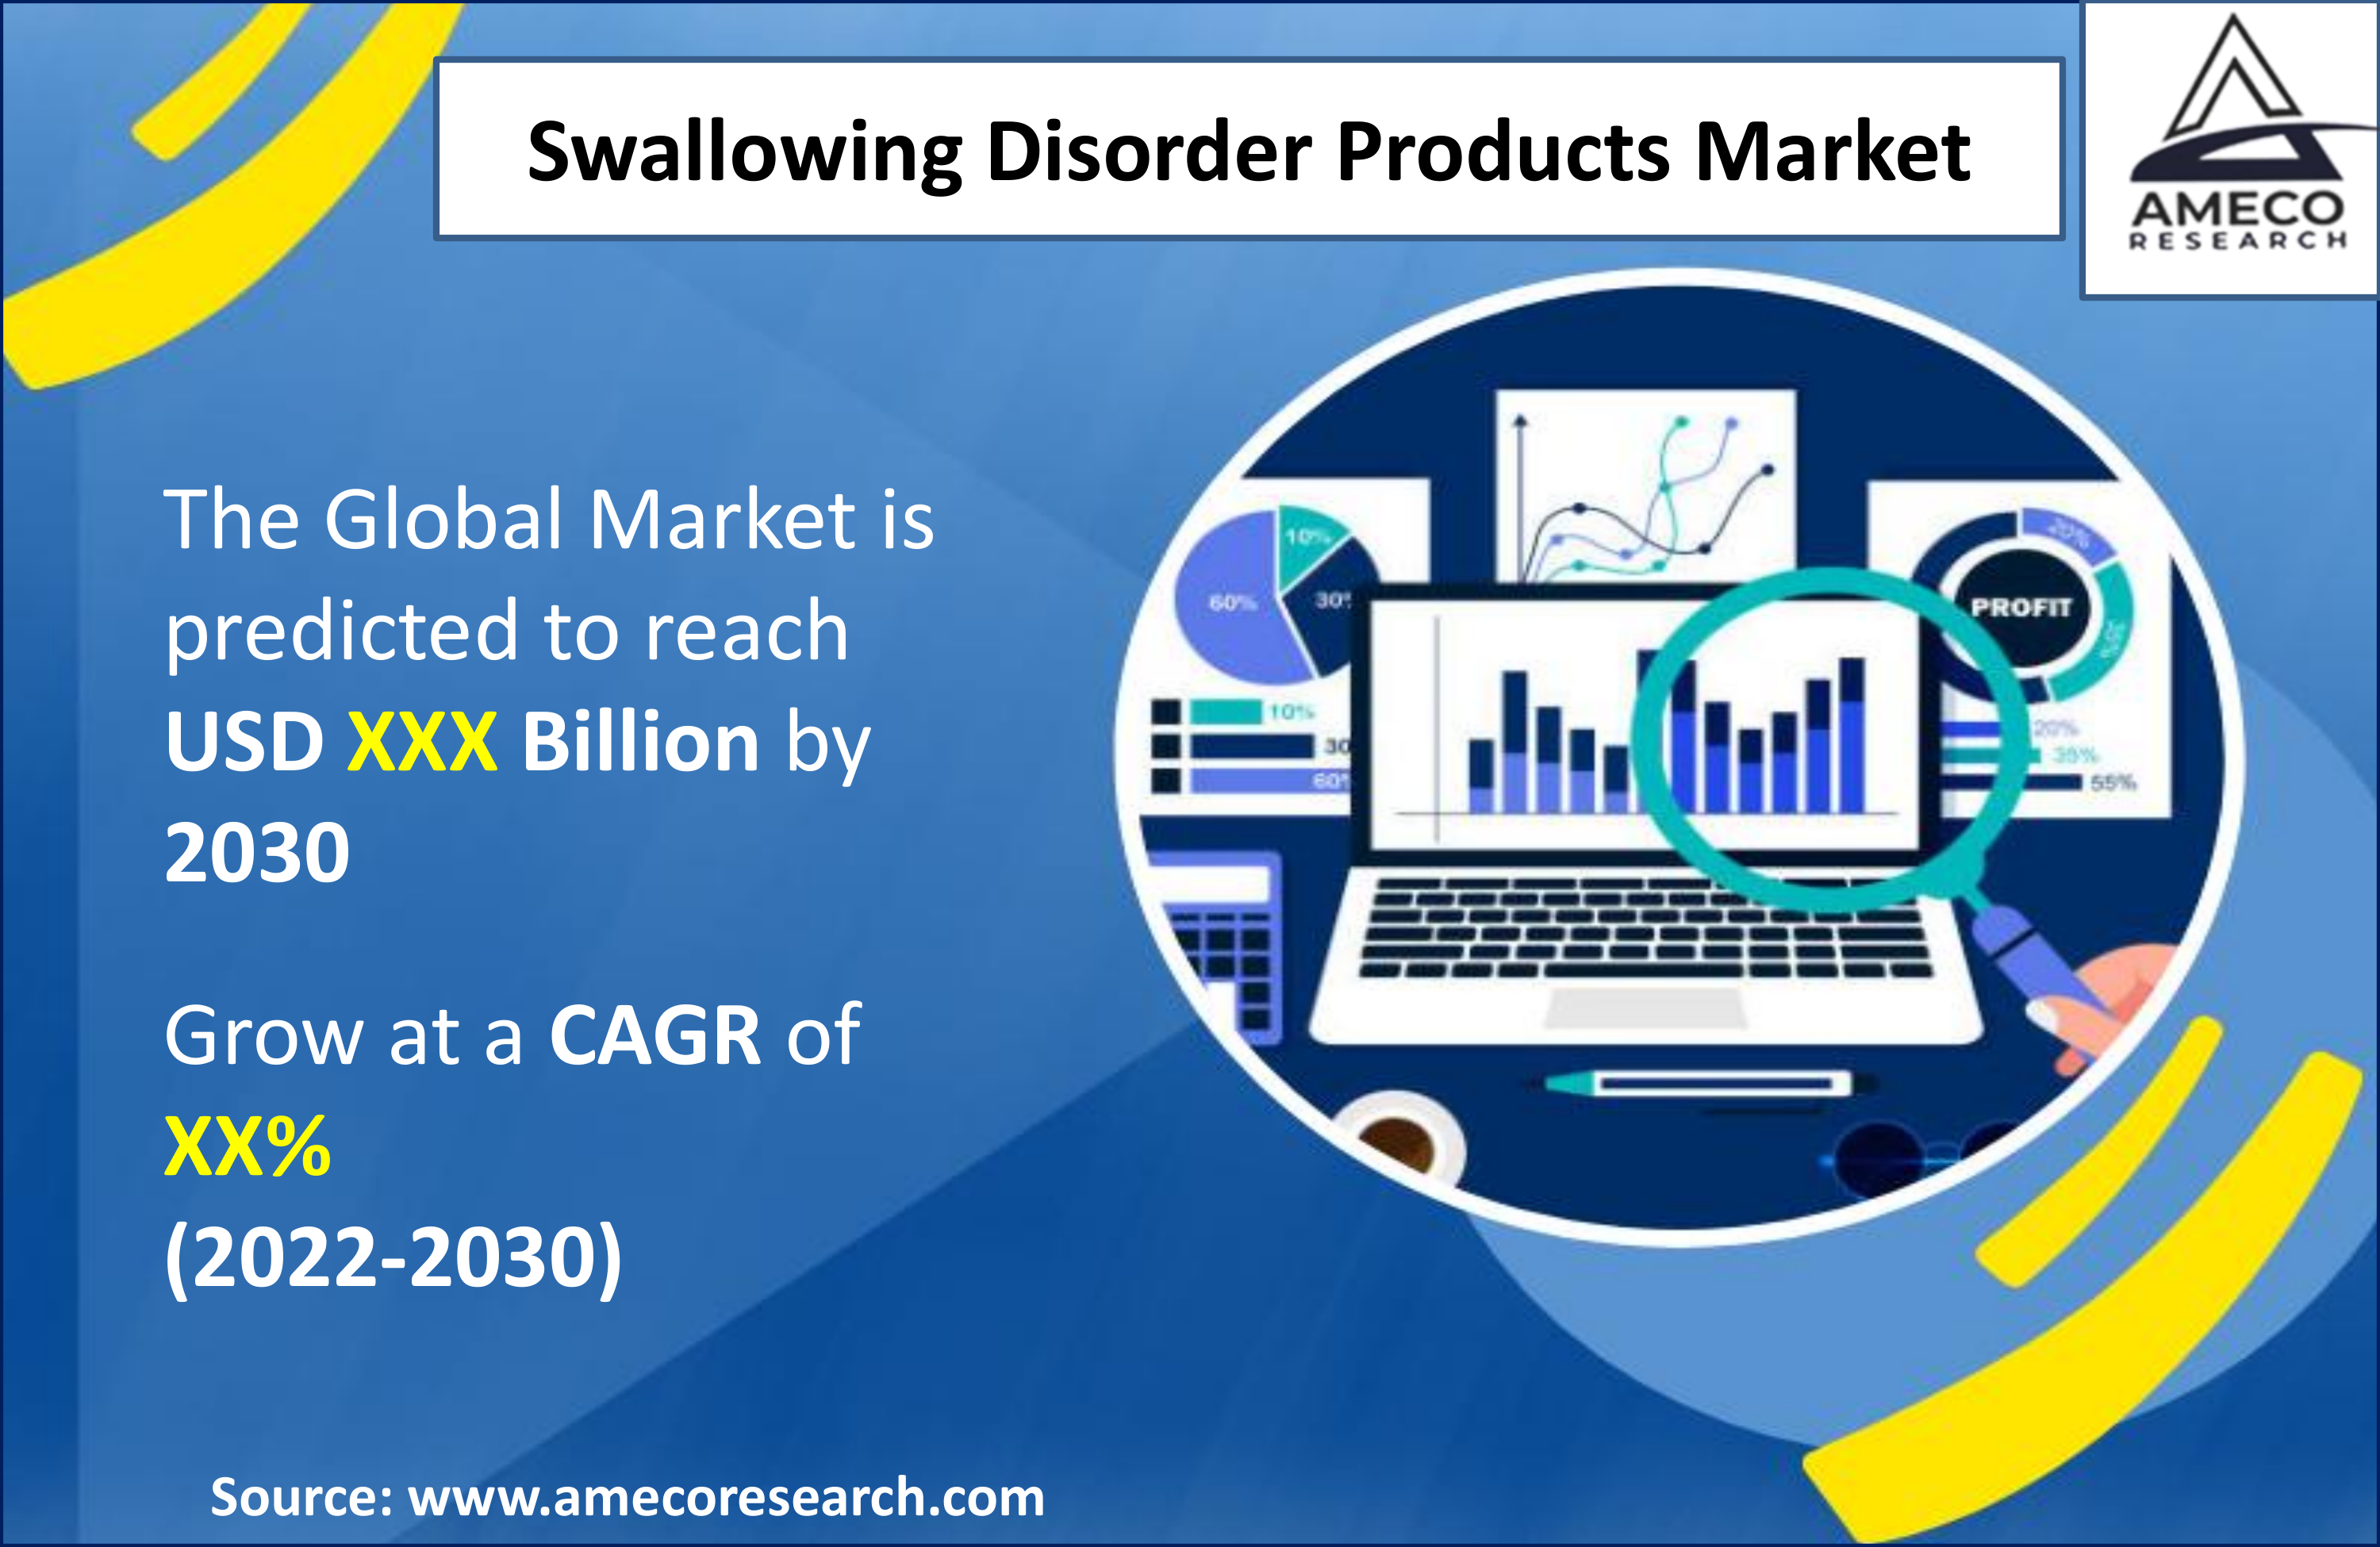 Swallowing Disorder Products Market